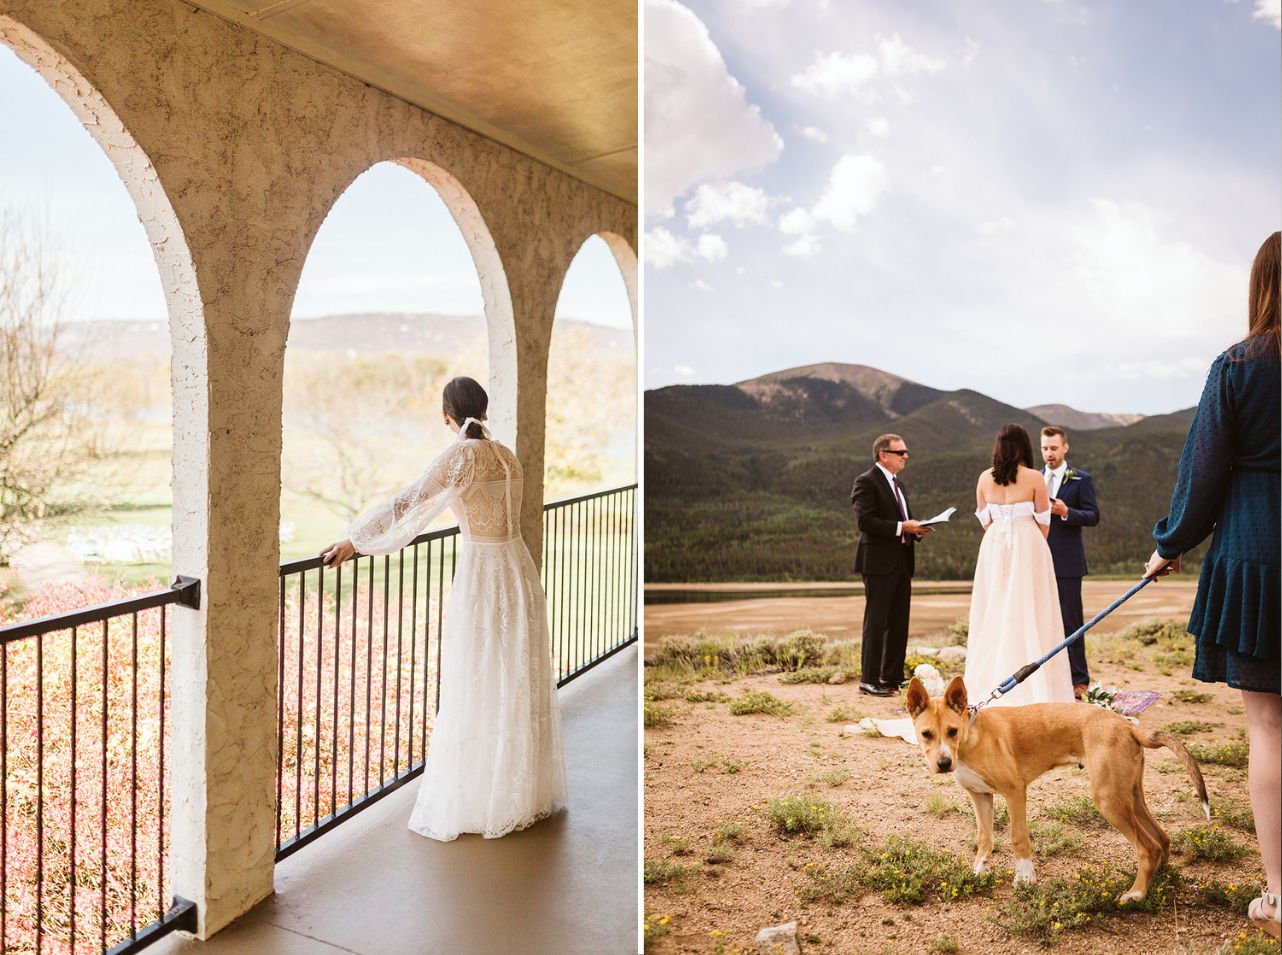 A bride stands at a railing overlooking the vista outside of her wedding venue.